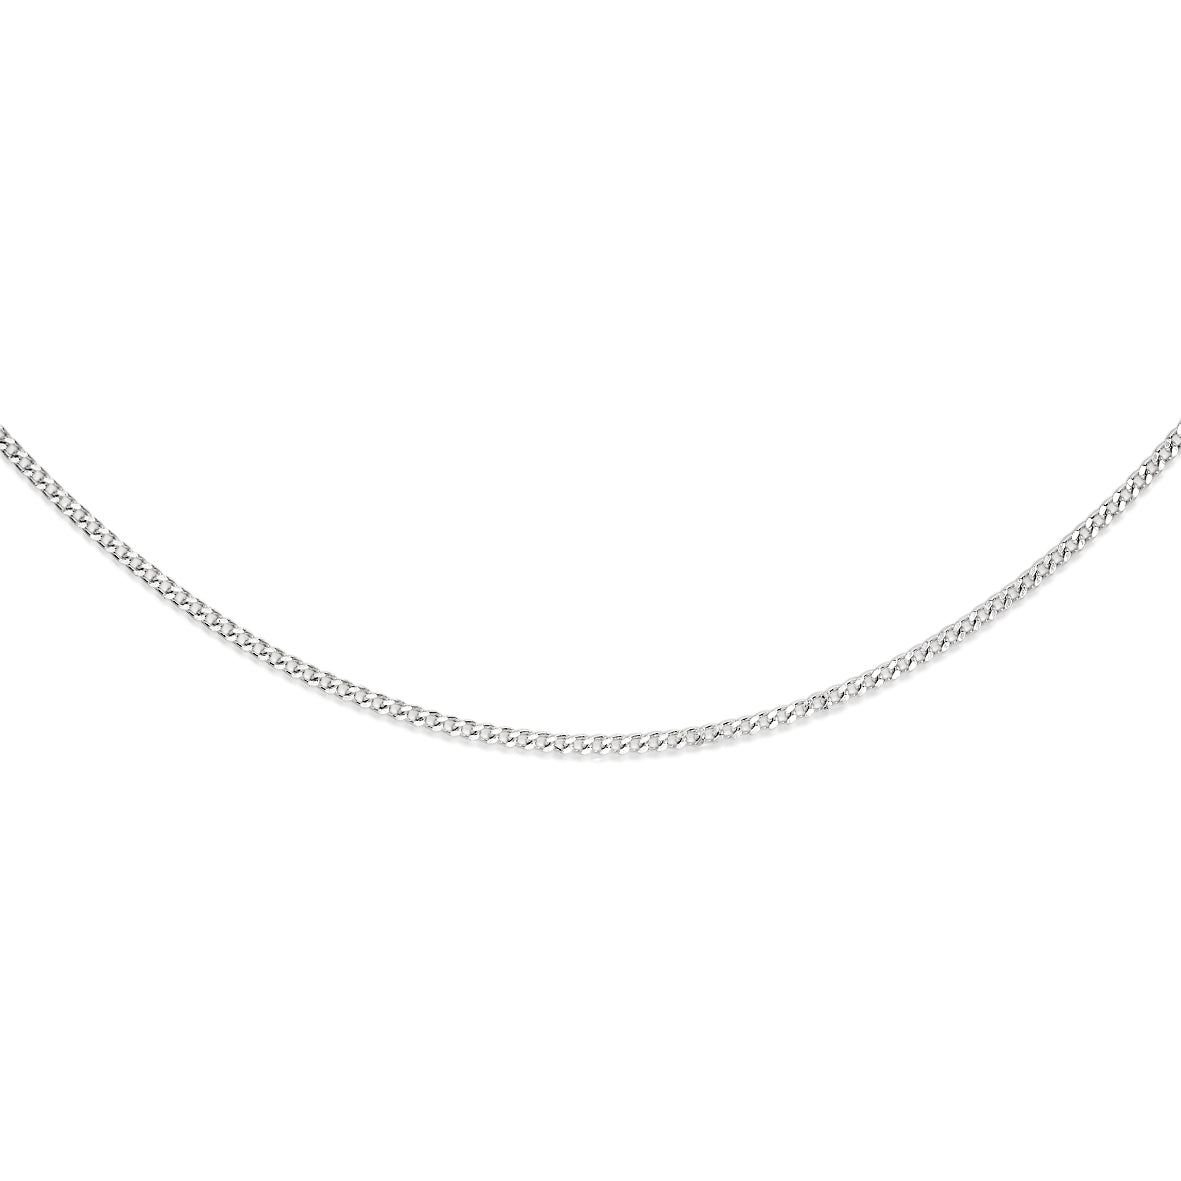 Sterling silver curb link chain